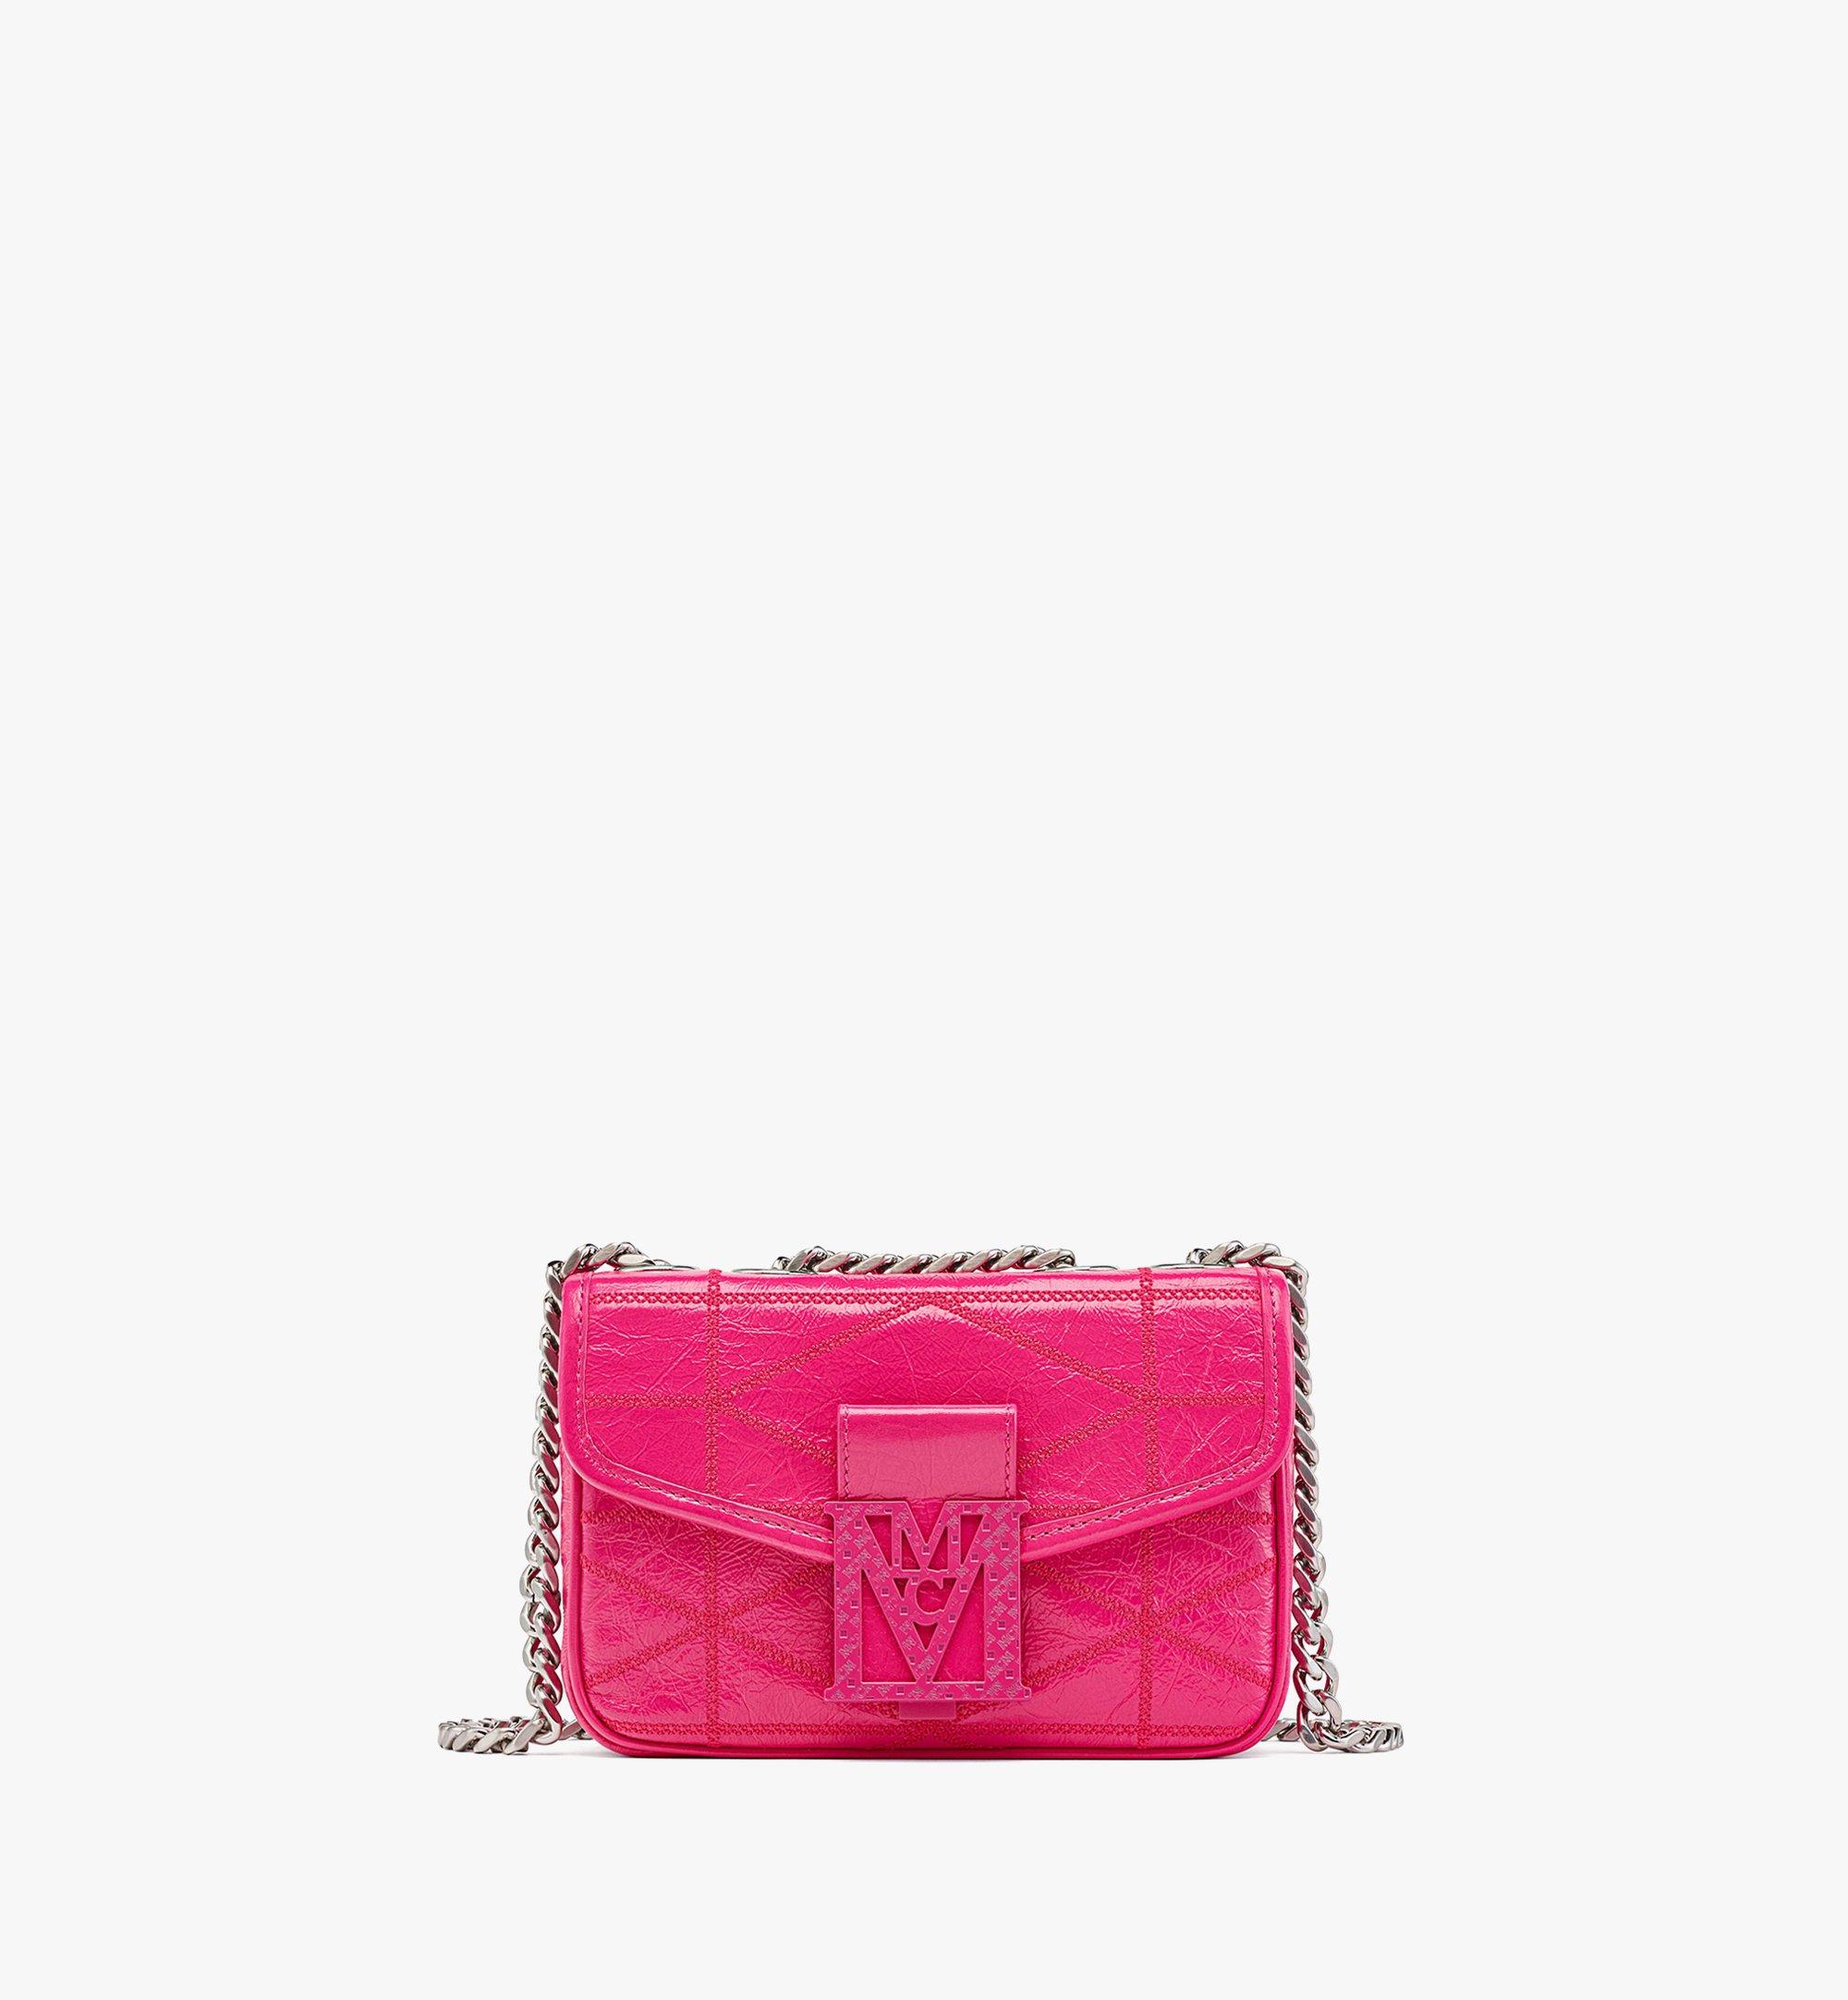 MCM Travia Quilted Shoulder Bag in Crushed Leather Pink MWSCSLM04QW001 Alternate View 1